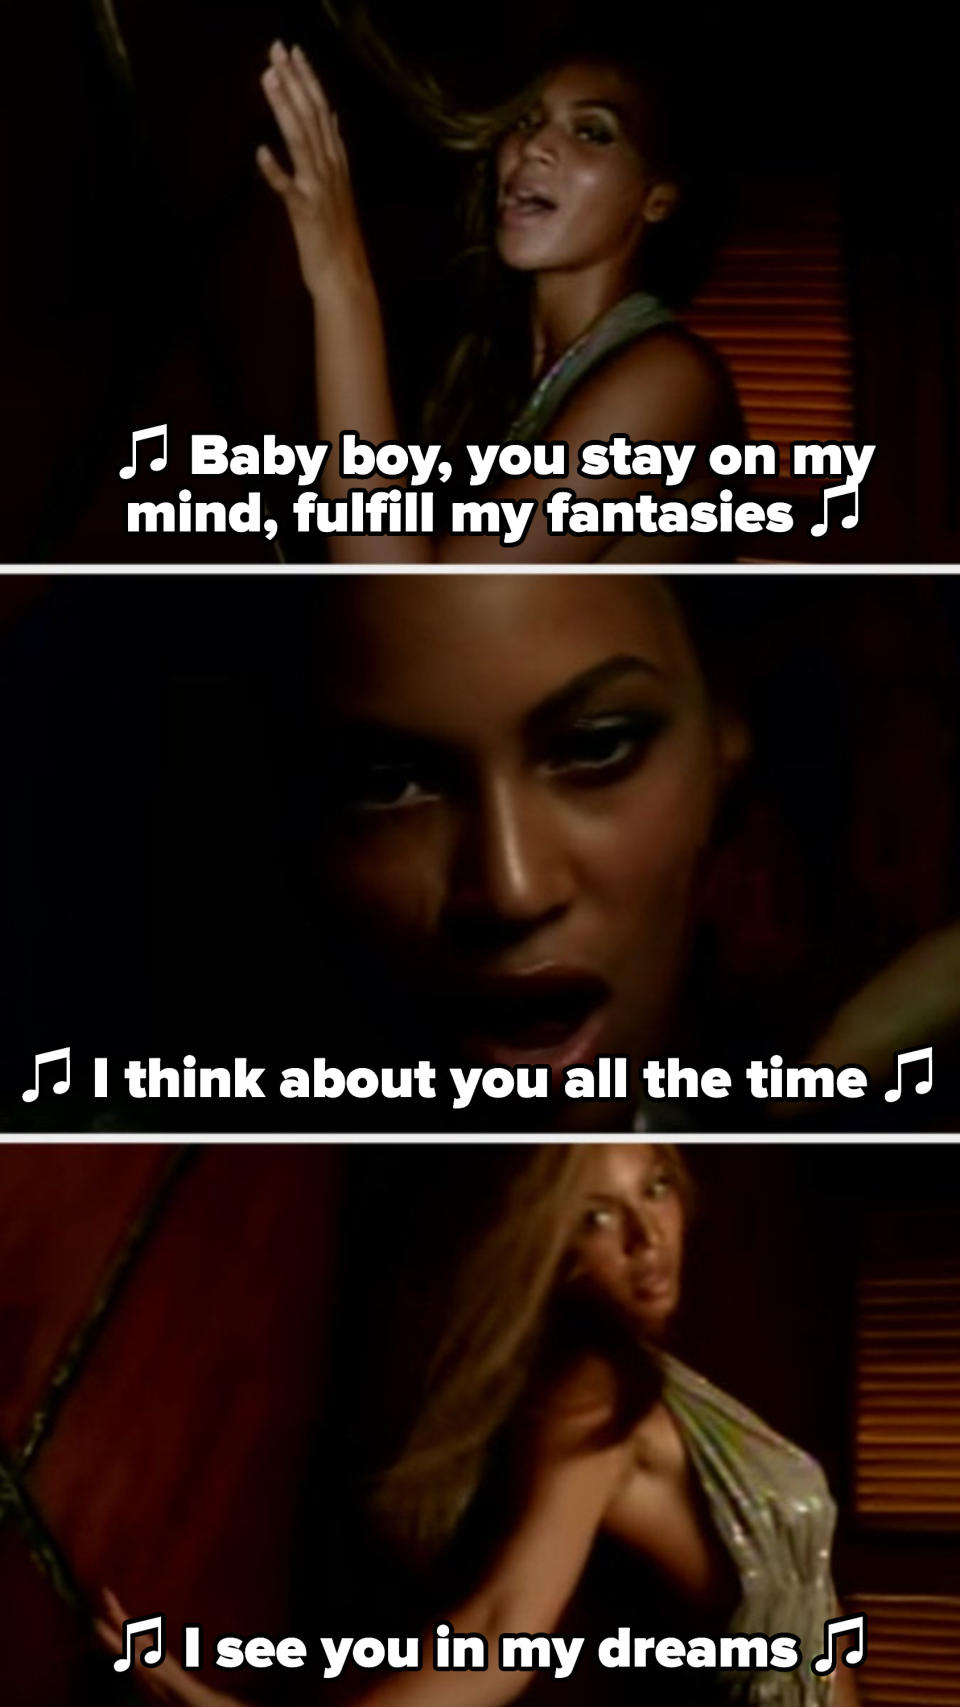 Beyoncé dancing up against a wall in her "Baby Boy" music video, singing: "Baby boy, you stay on my mind, fulfill my fantasies. I think about you all the time, I see you in my dreams"